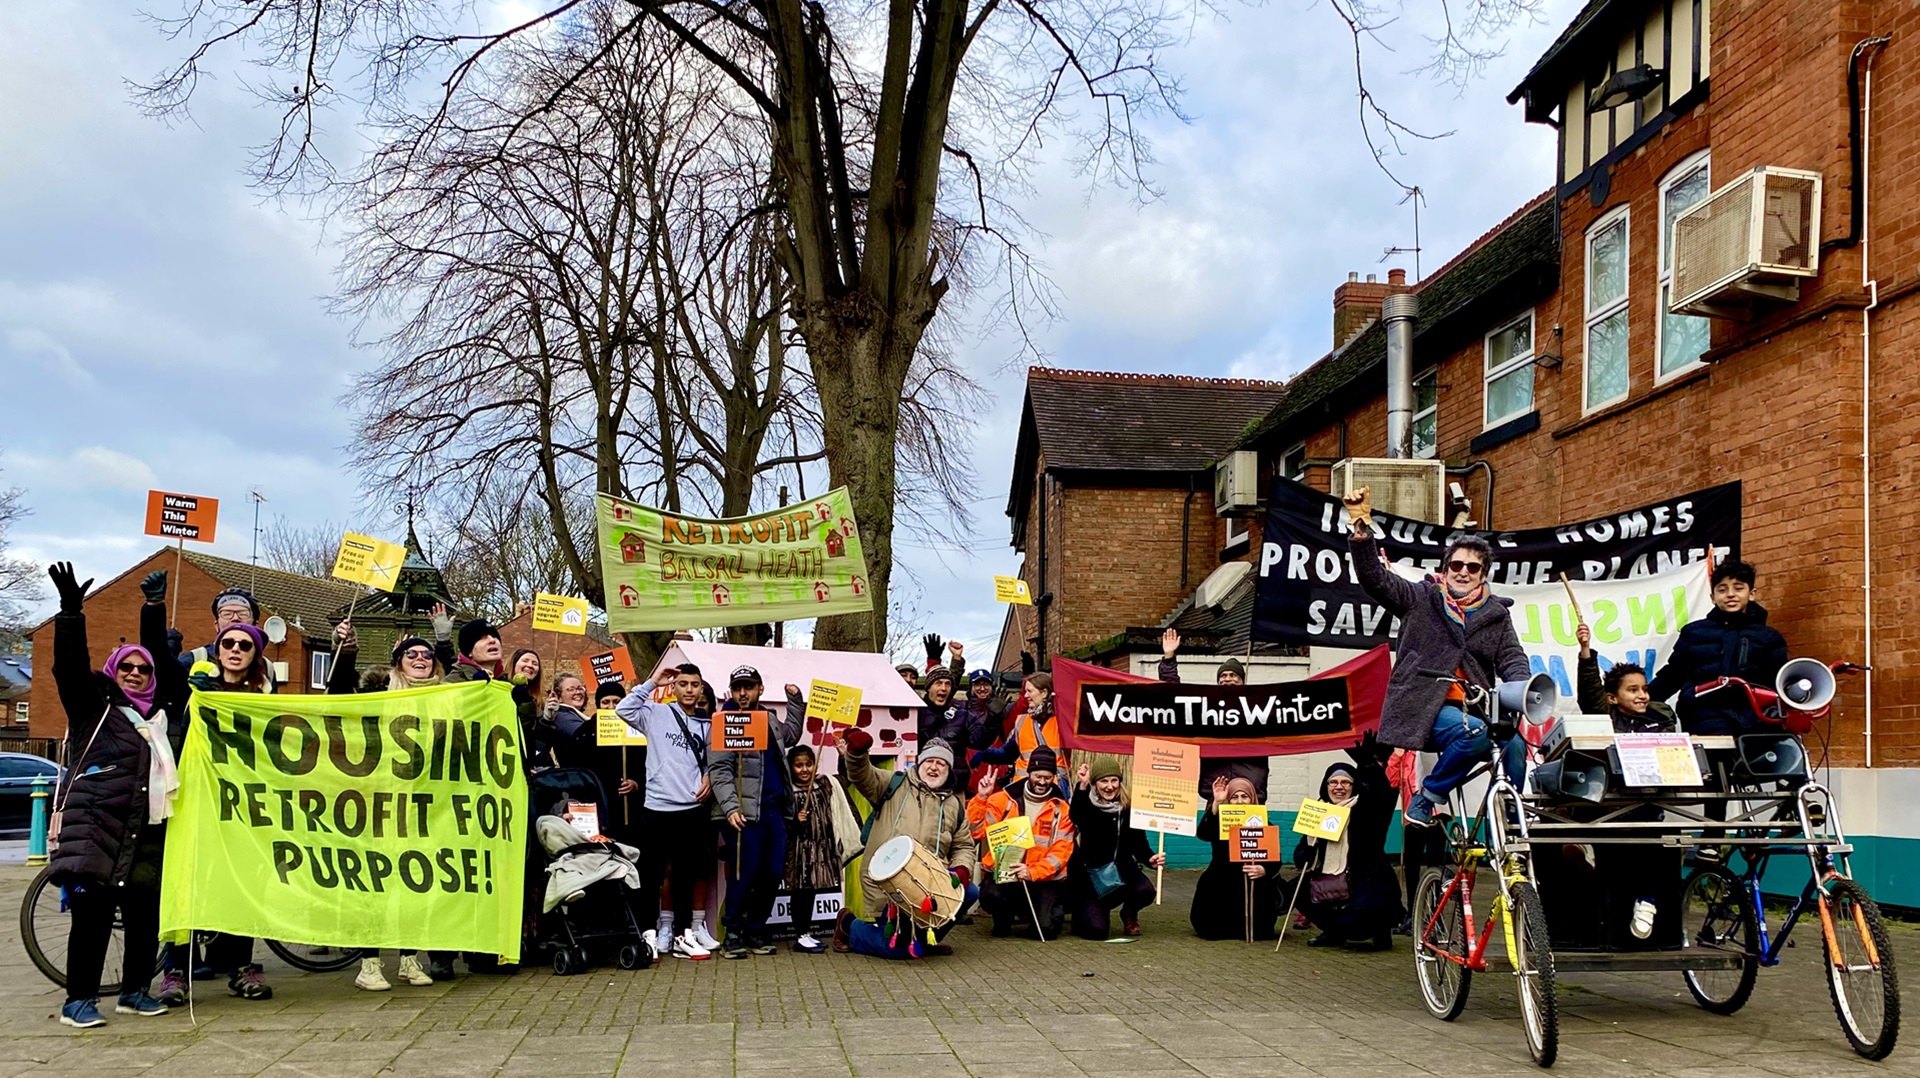 The people of Balsall Heath in Birmingham have come together to battle energy bill and the climate crisis